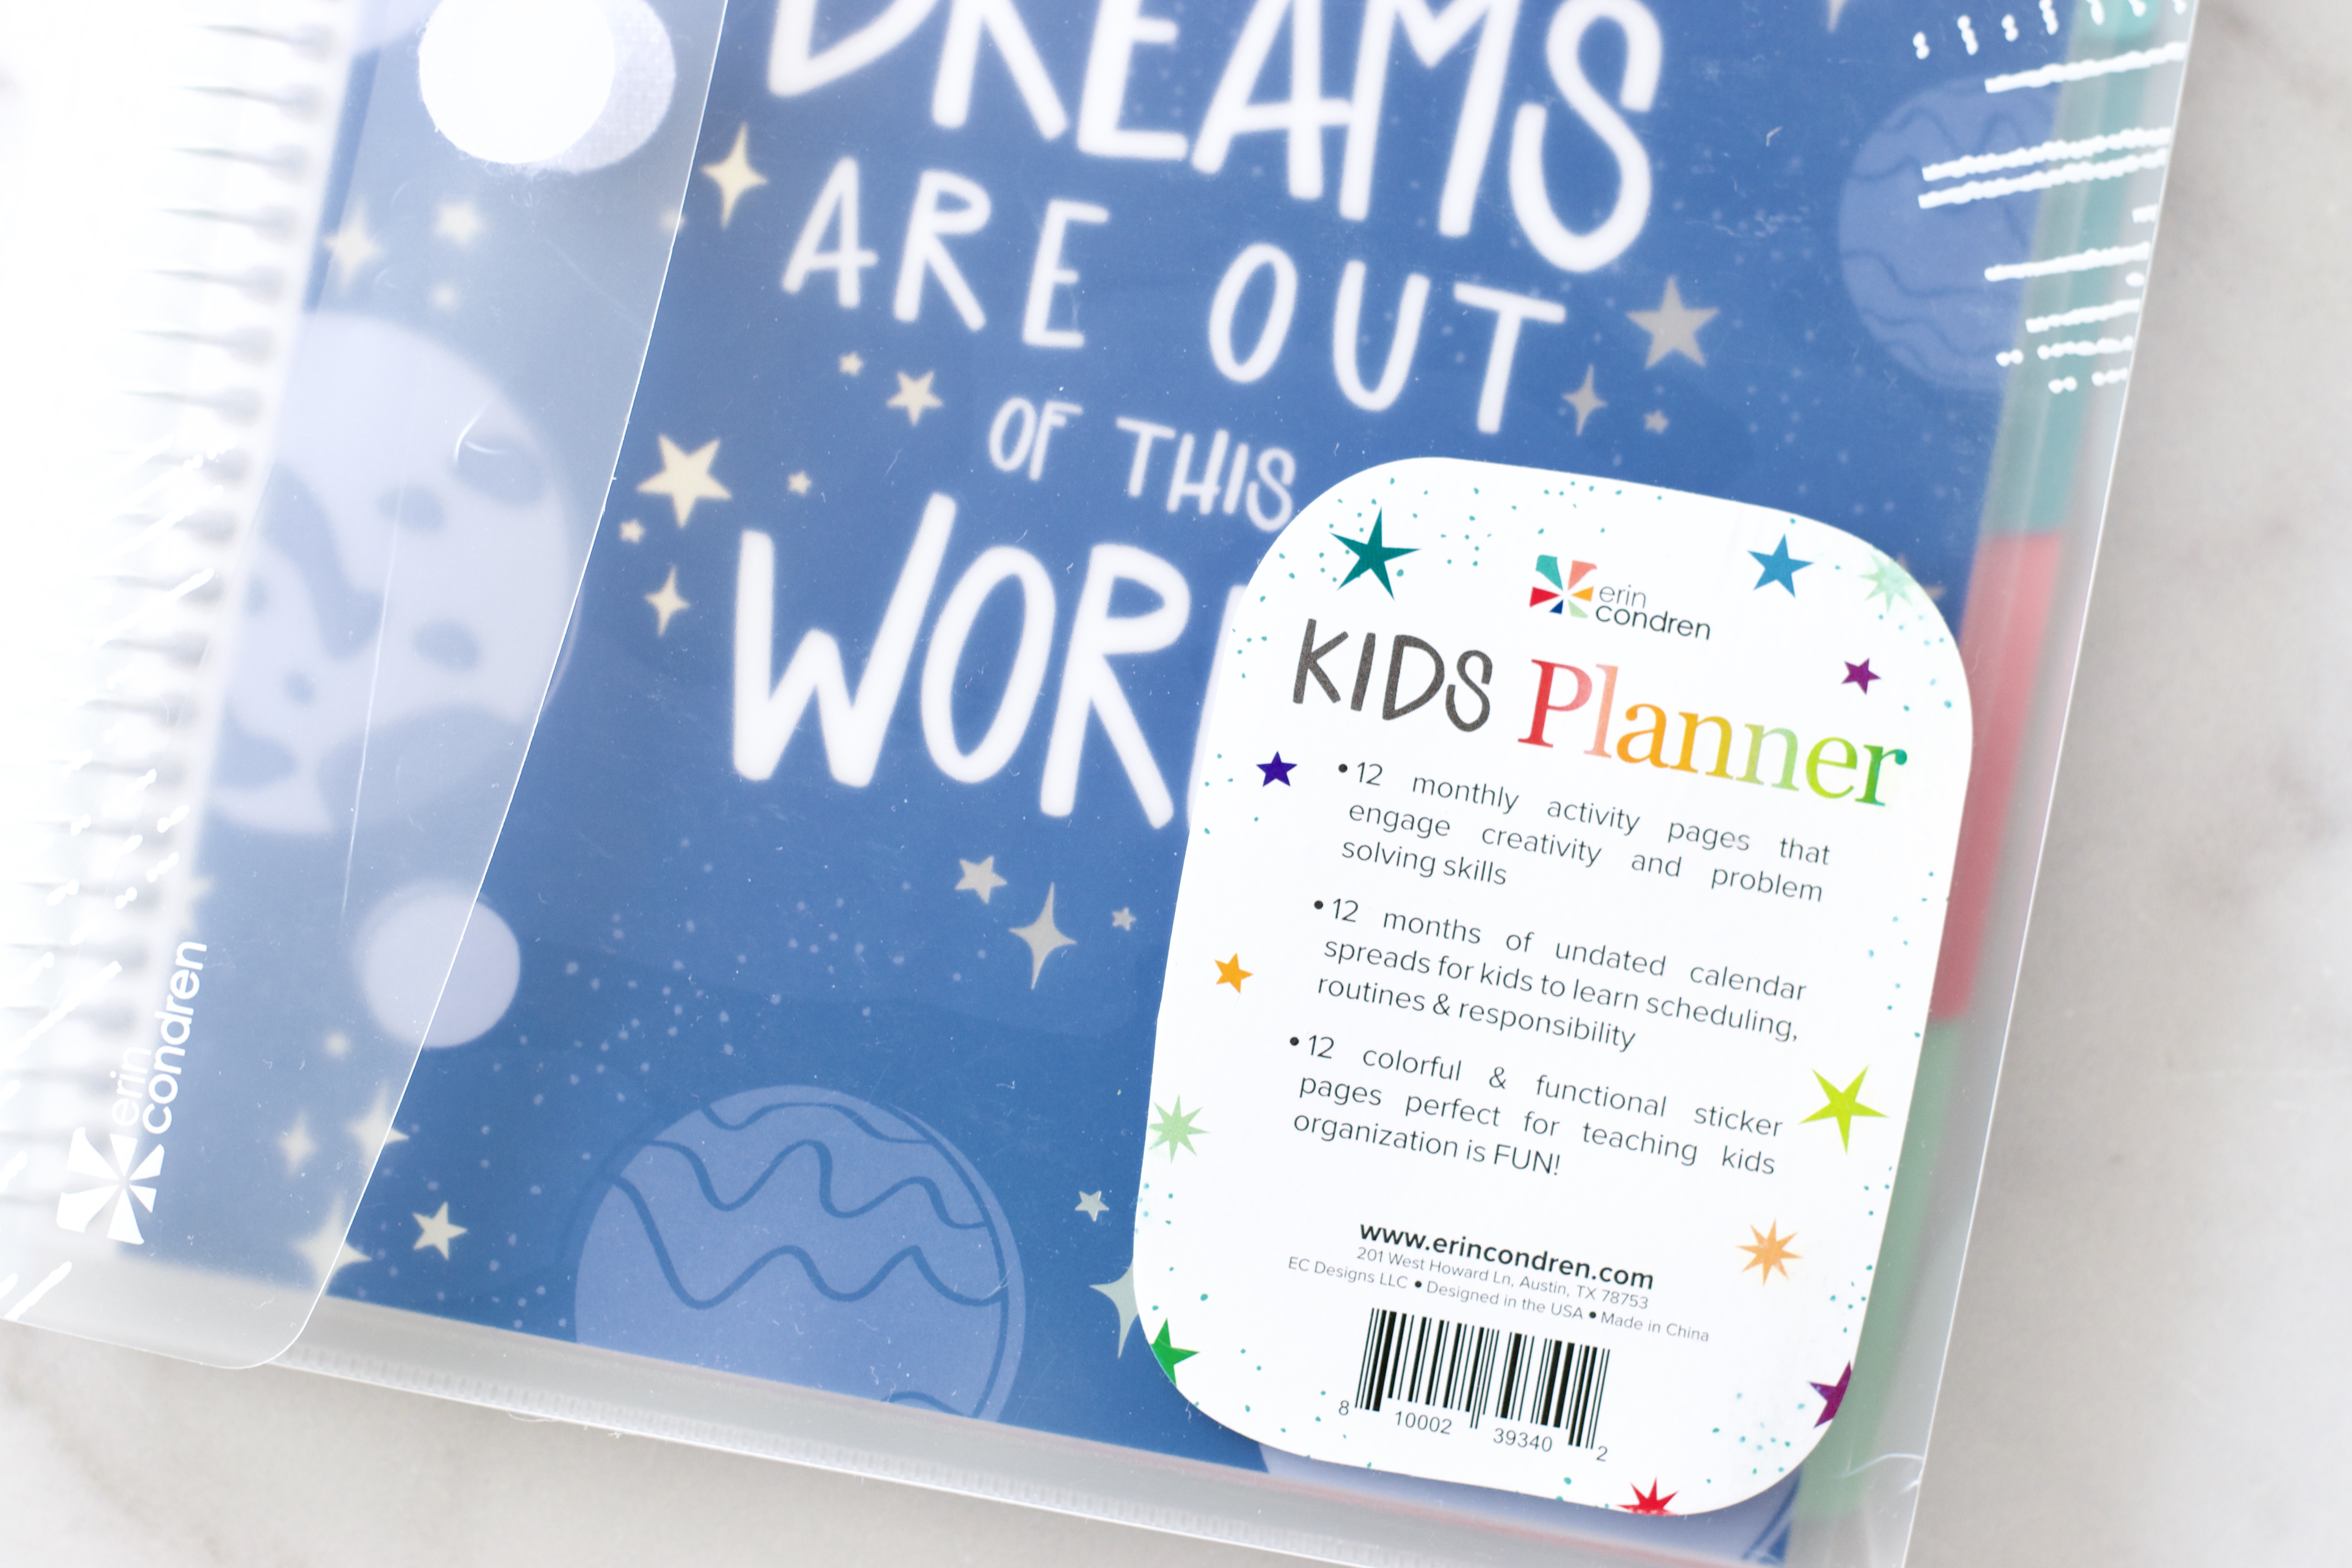 Dreaming Has No Limits Month Undated Planner with Dividers and Activity Sheets and Stickers. 7 x 9 2nd Edition Erin Condren Kids Planner /& Activity Book 12